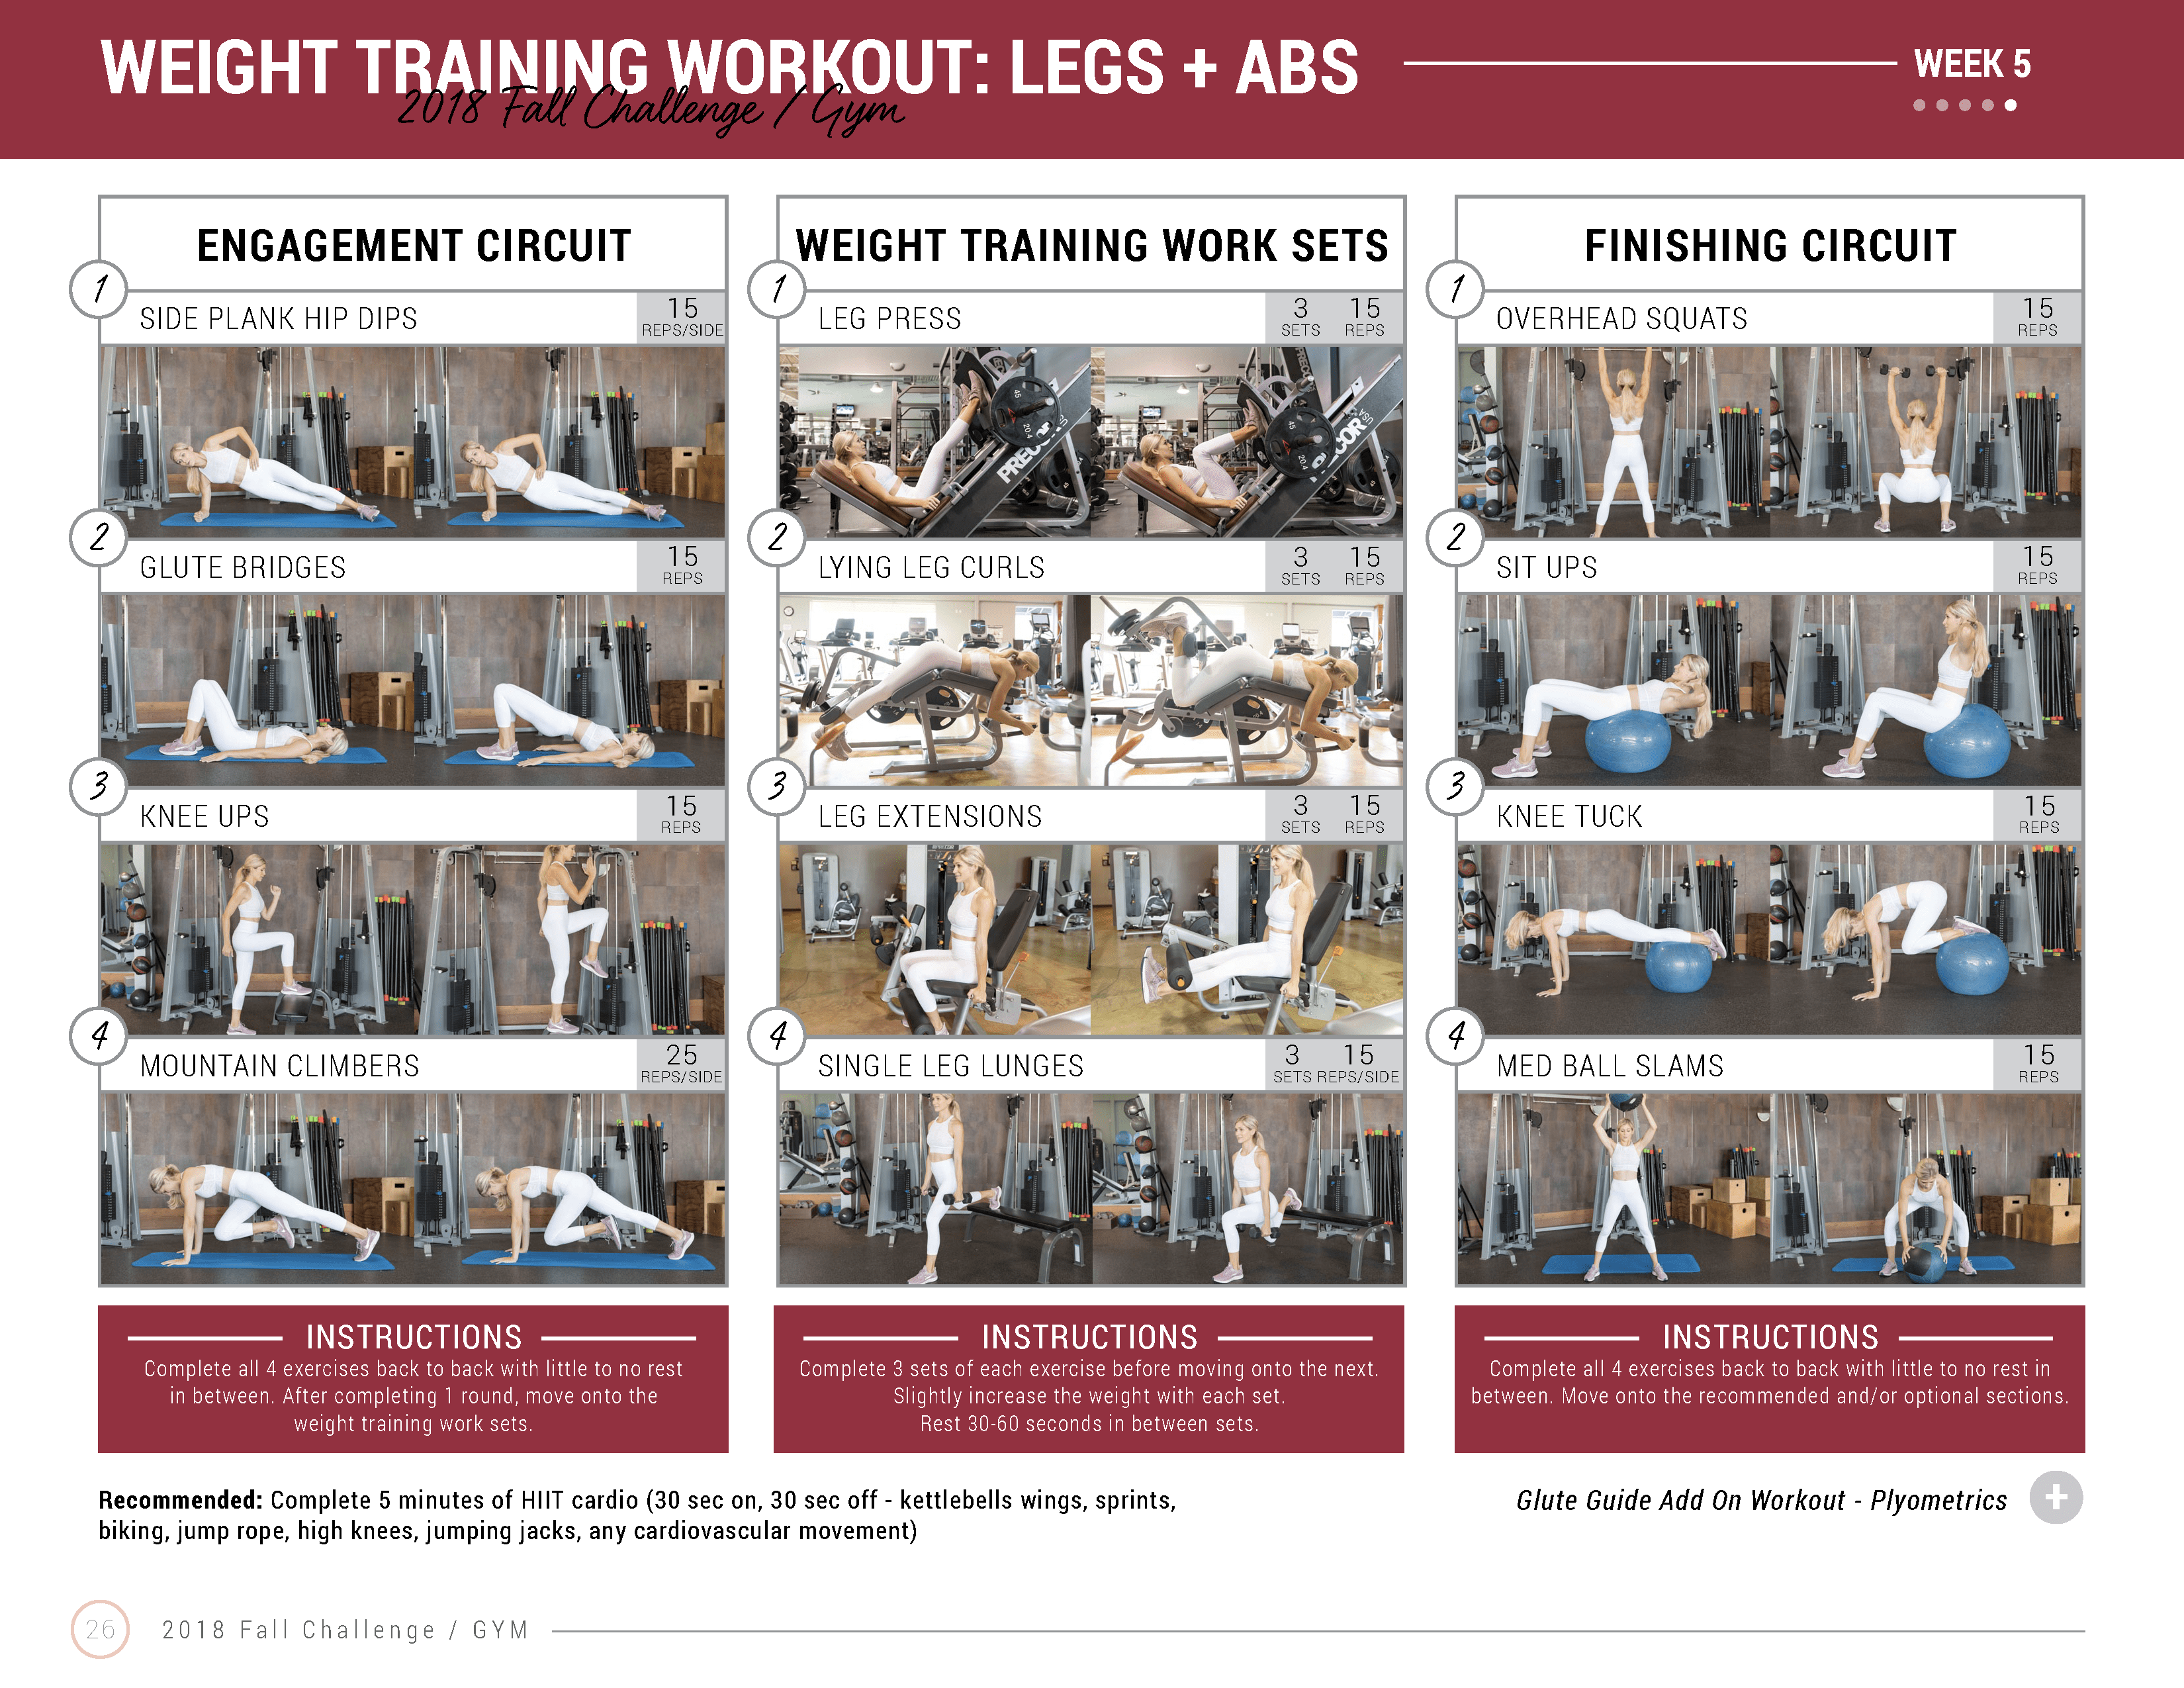 legs and abs gym workout